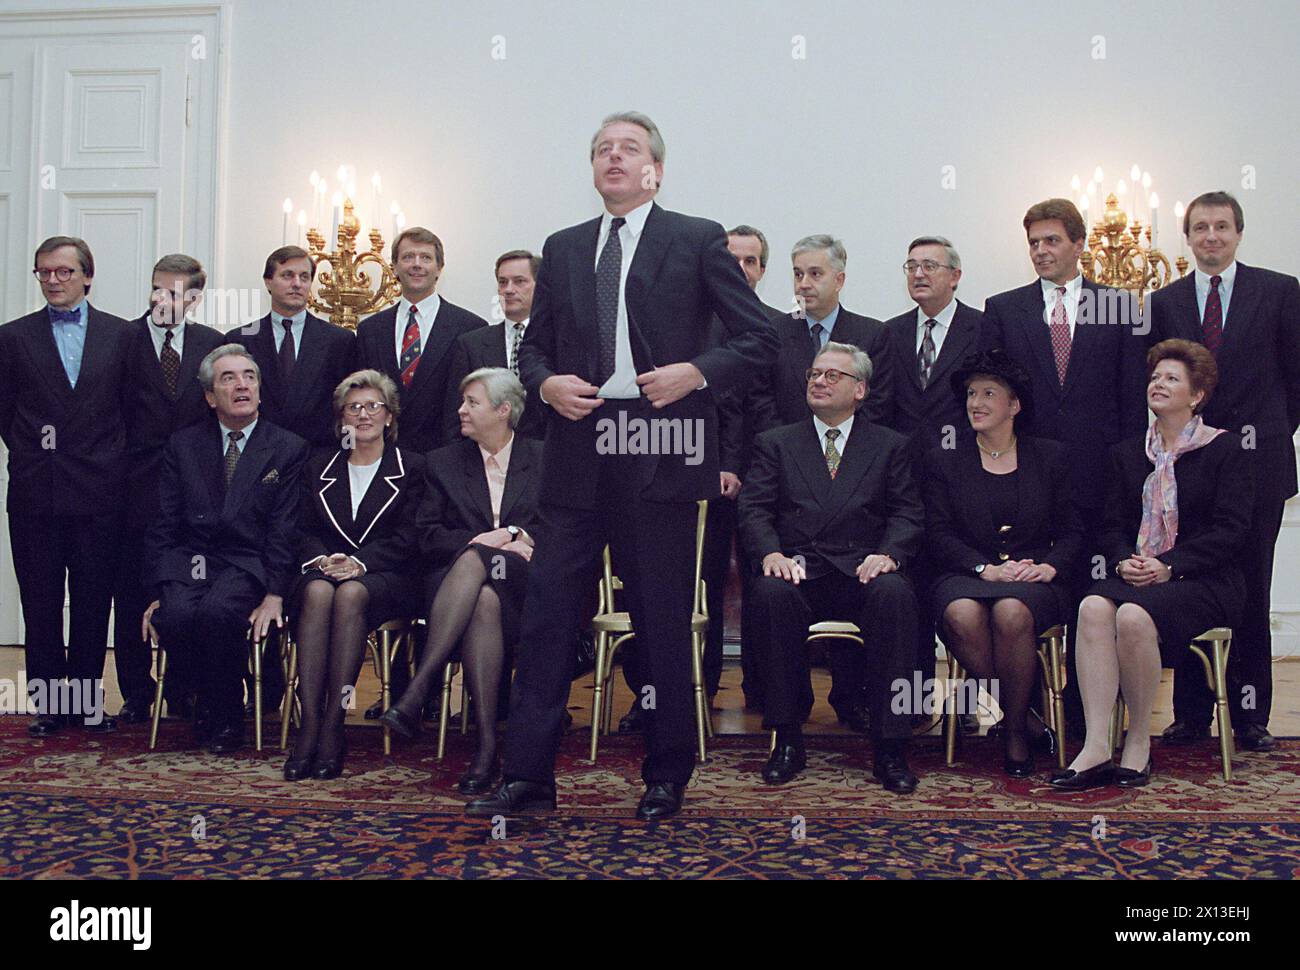 Family portrait of the Austrian government, captured on November 29th 1994. In the first row (l-r): Foreign minister Alois Mock (OEVP), health minister Christa Krammer (SPOE), minister for women's affairs Johanna Dohnal (SPOE), Federal Chancellor Franz Vranitzky (SPOE), vice chancellor Erhard Busek (OEVP), environmental minister Maria Rauch-Kallat (OEVP) and family minister Sonja Moser (OEVP). Second row (l-r): Economy minister Wolfgang Schuessel (OEVP), agriculture minister Wilhelm Molterer (OEVP), State Secretary Johannes Ditz (OEVP), State Secretary Gerhard Schaeffer (OEVP), justice ministe Stock Photo